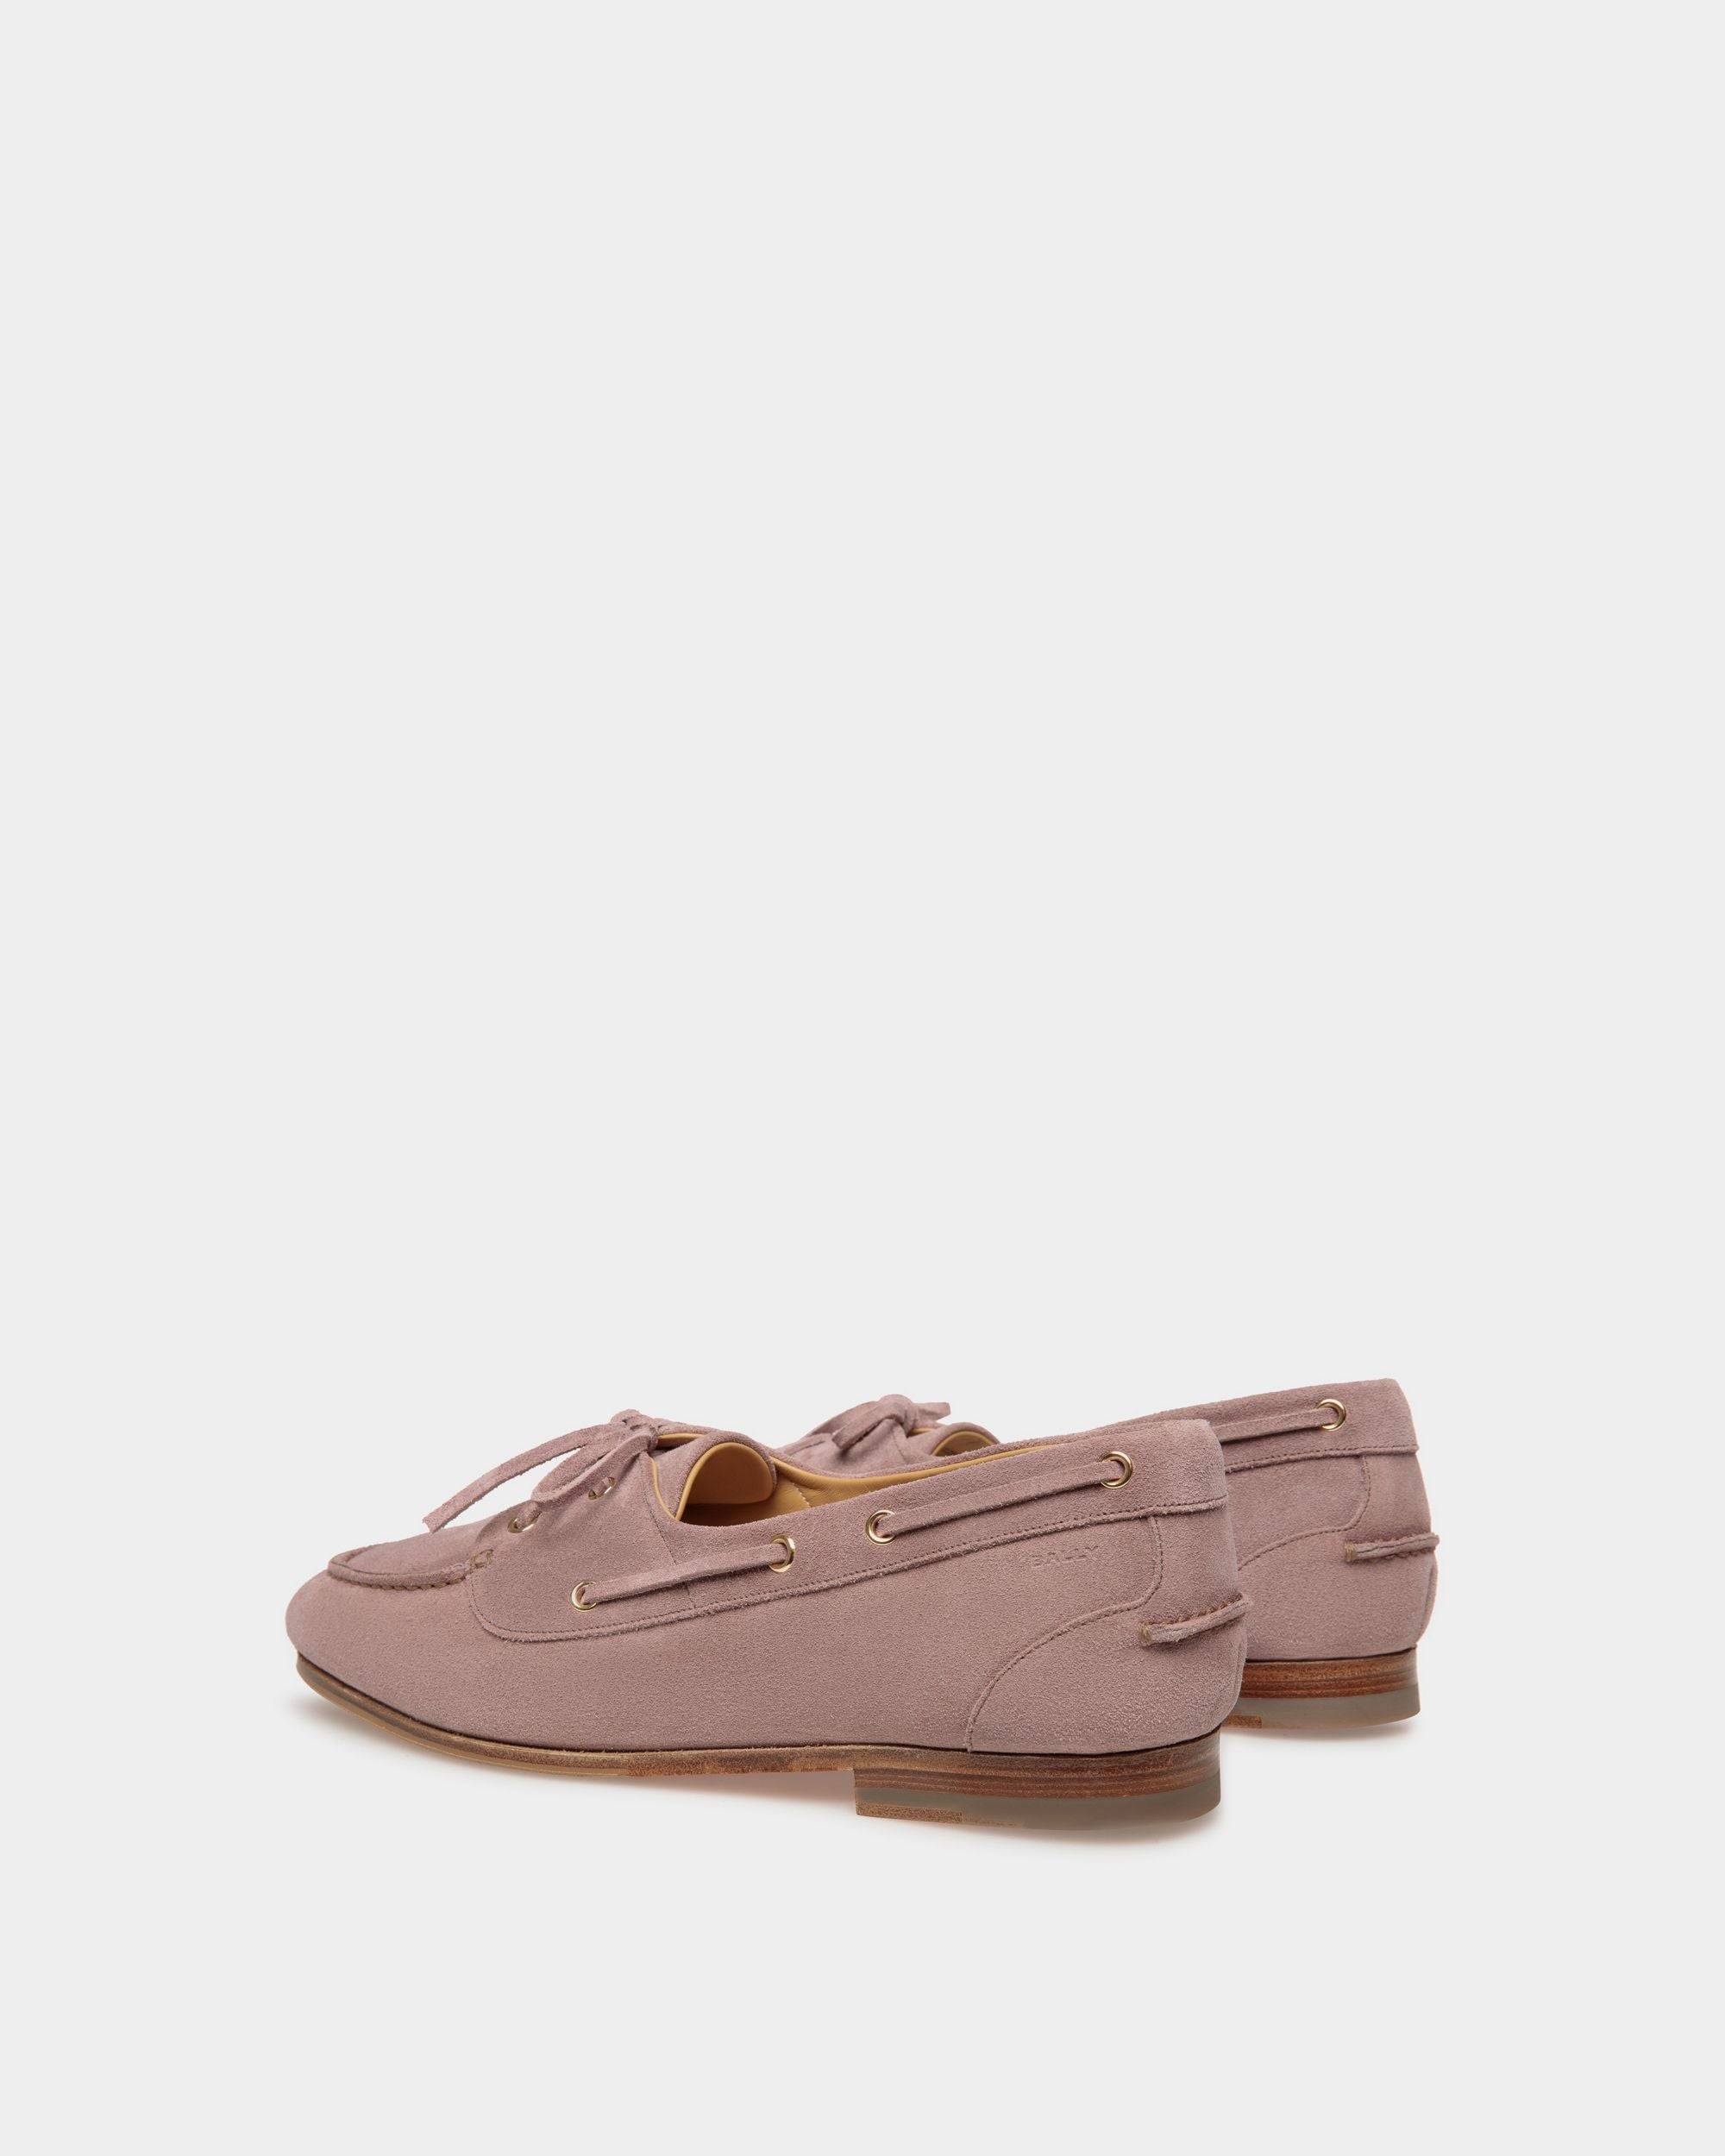 Plume | Men's Moccasin in Light Mauve Suede| Bally | Still Life 3/4 Back